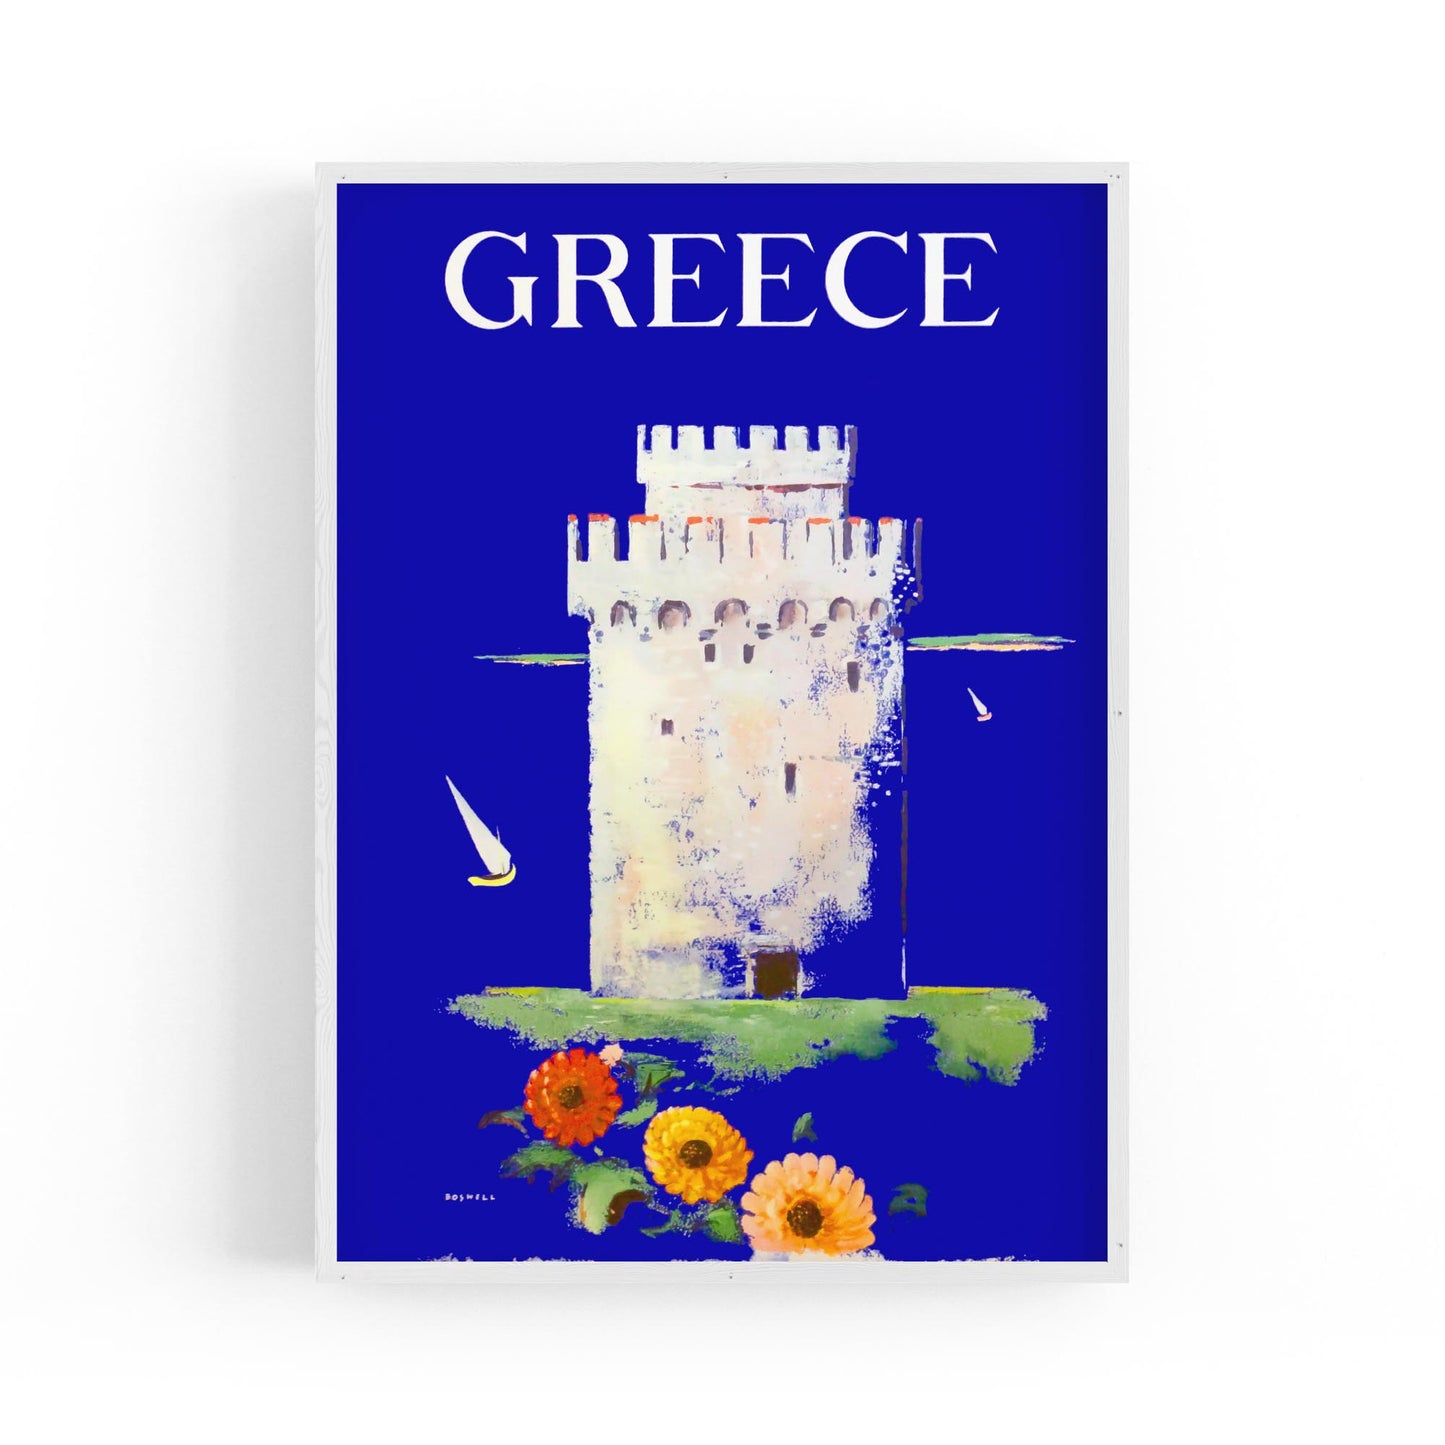 Salonica White Tower of Thessaloniki, Greece by Boswell | Framed Vintage Travel Poster